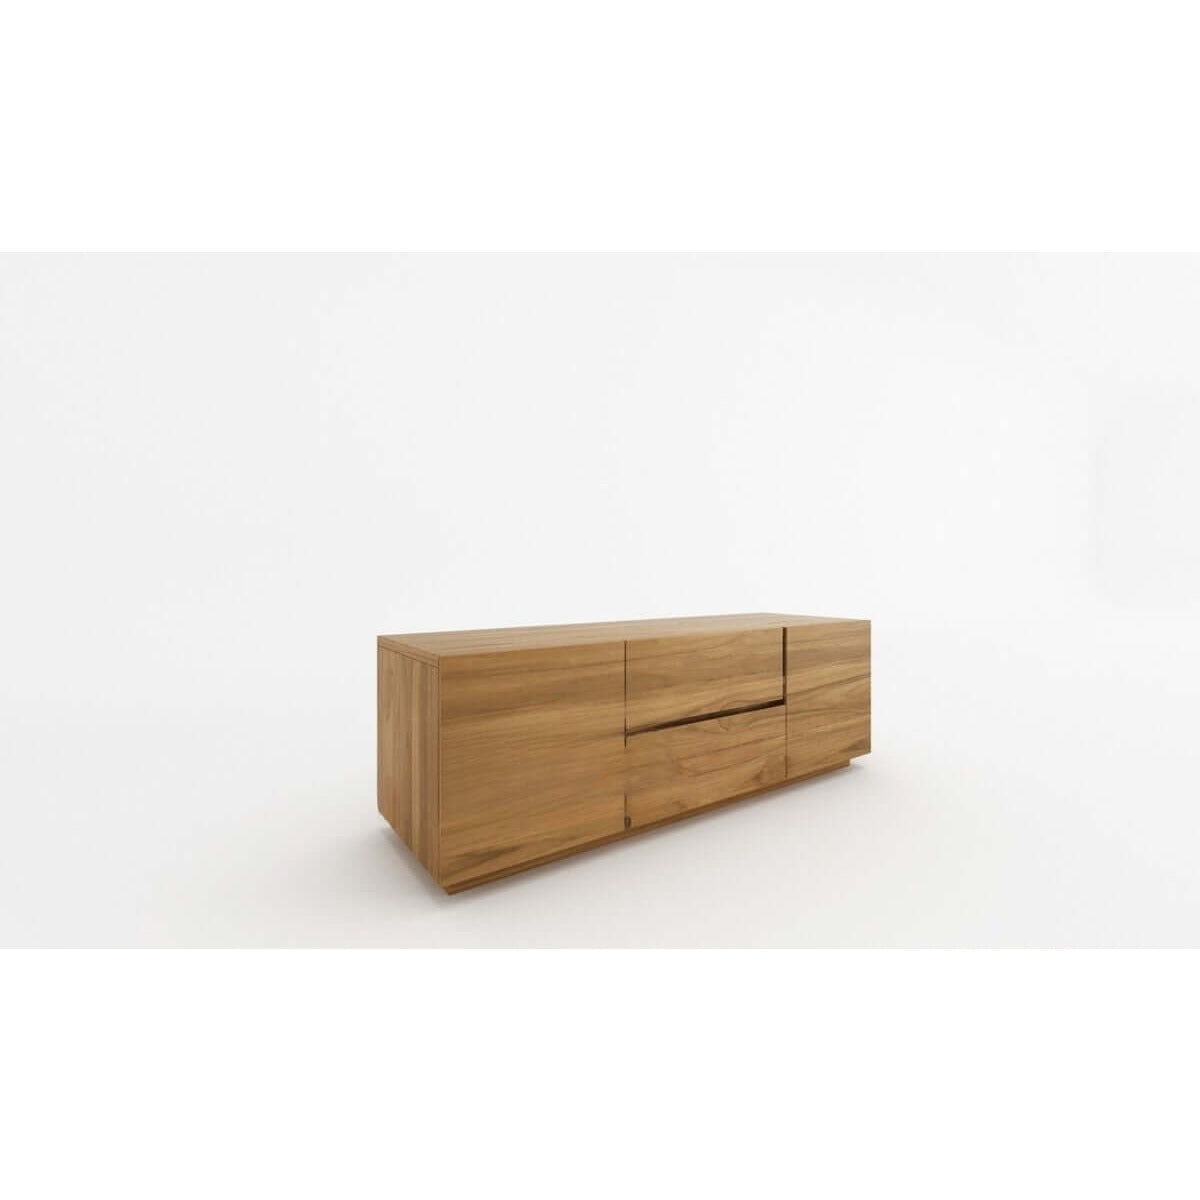 Teak Modern TV Stand consists of 2 built-in pull-out drawers, 2 open-close doors, natural teak finish.